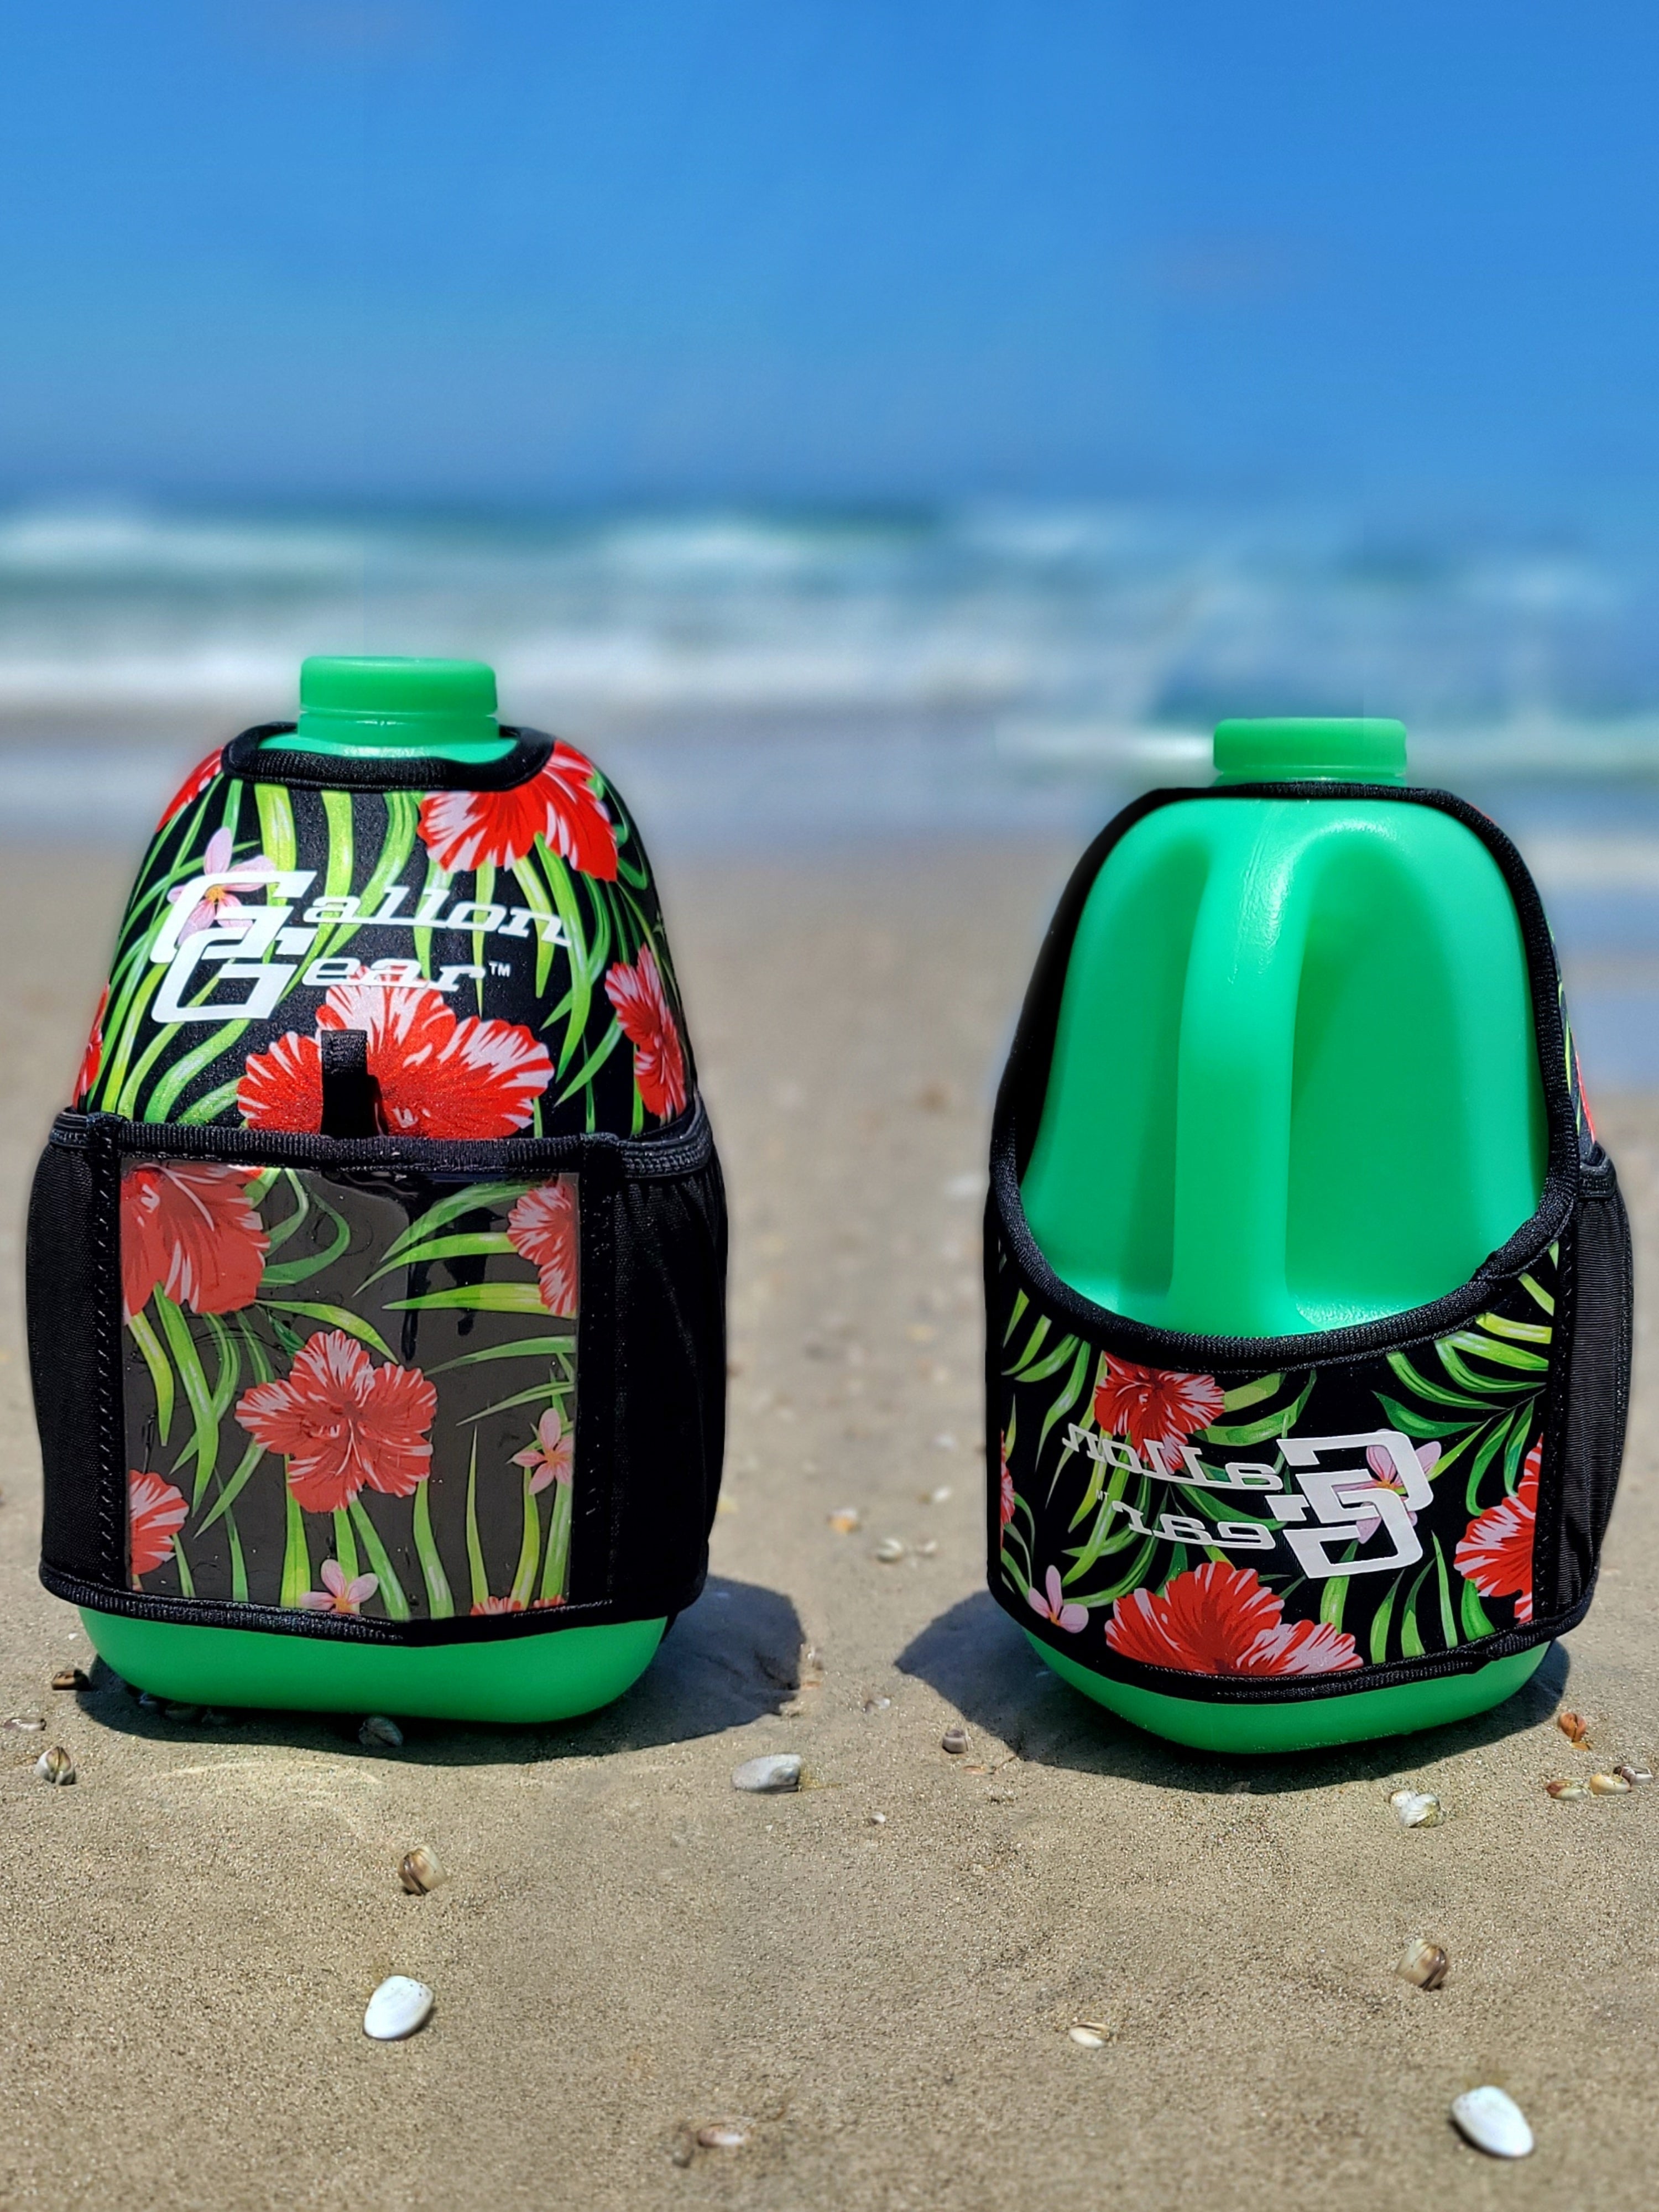 *PRE-ORDER AUGUST* GALLON GEAR 1 GALLON BOOTY | GYM WATER BOTTLE SLEEVE (FLORAL BLACK)